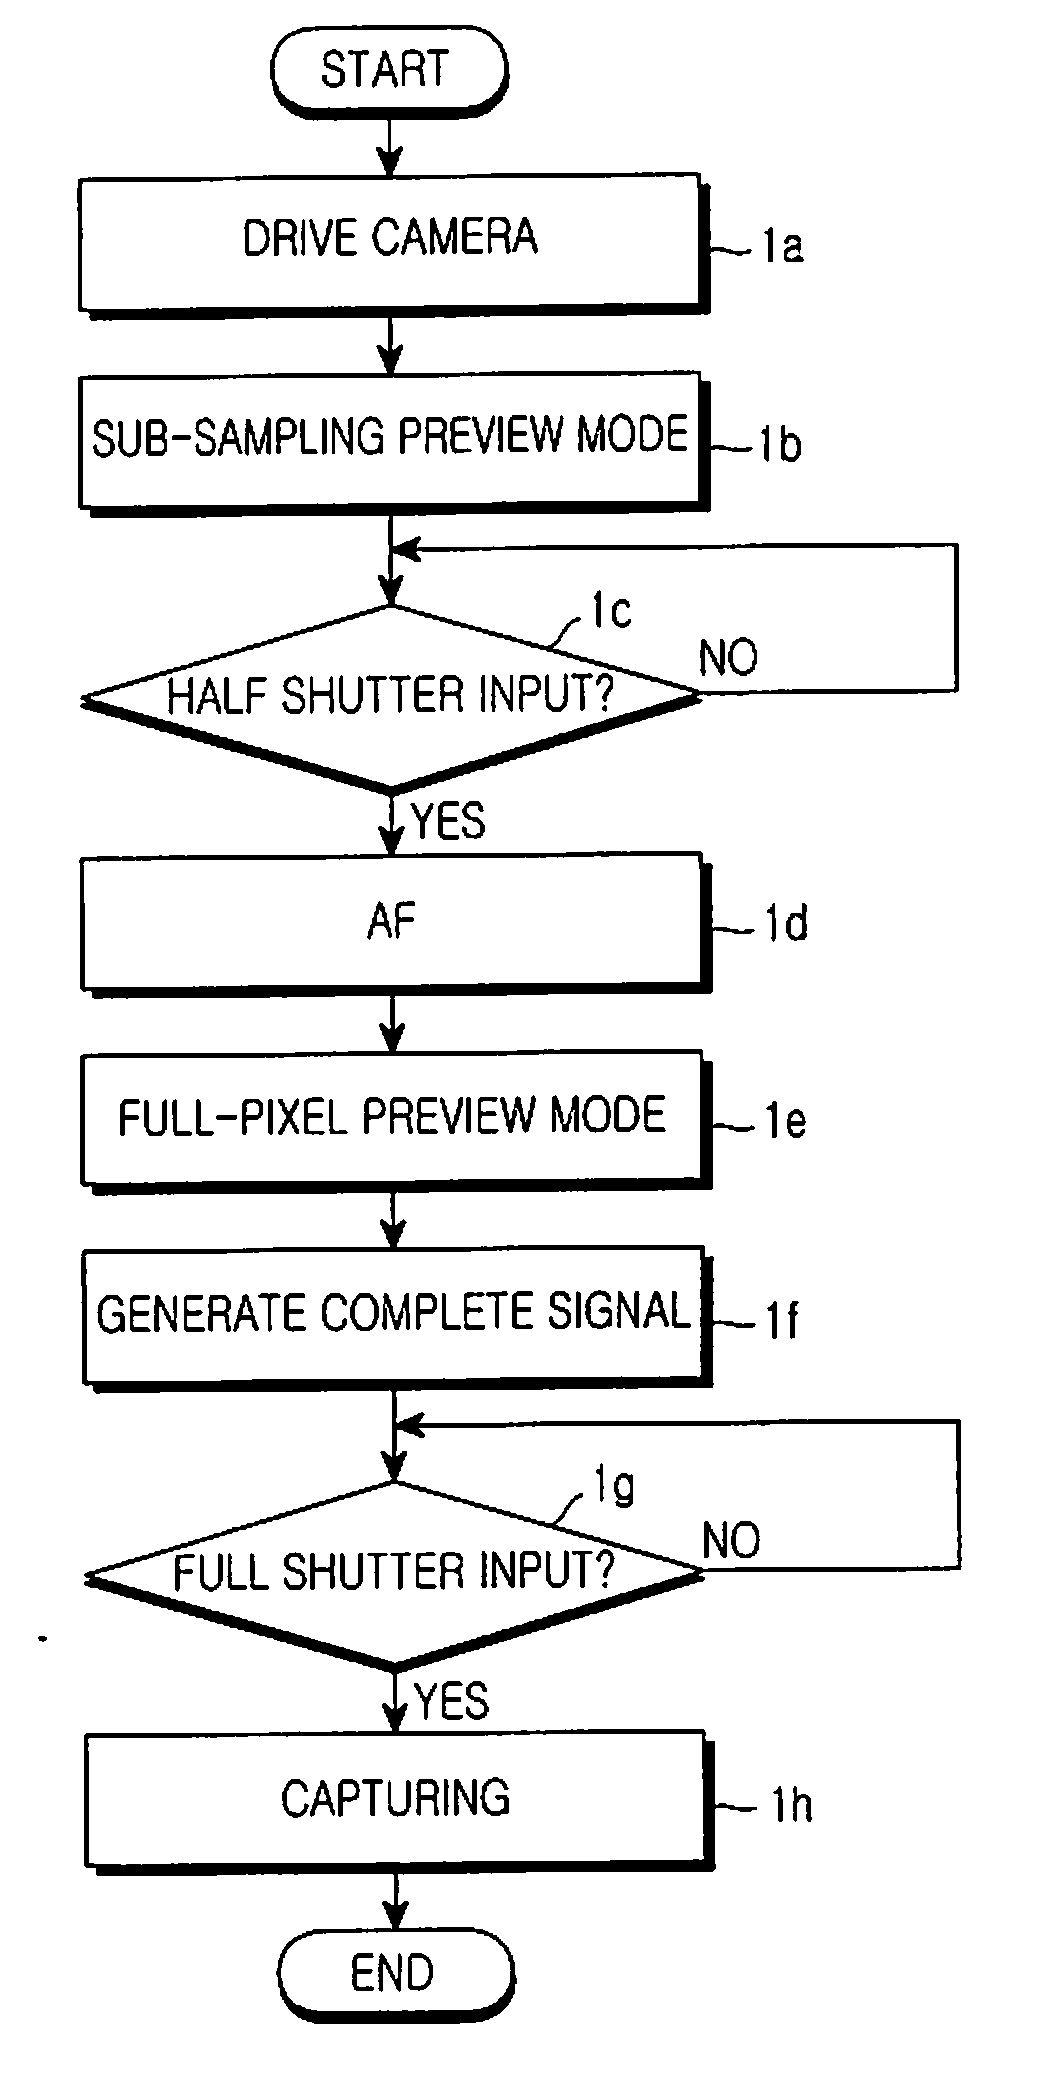 Apparatus and method for reducing shutter lag of a digital camera